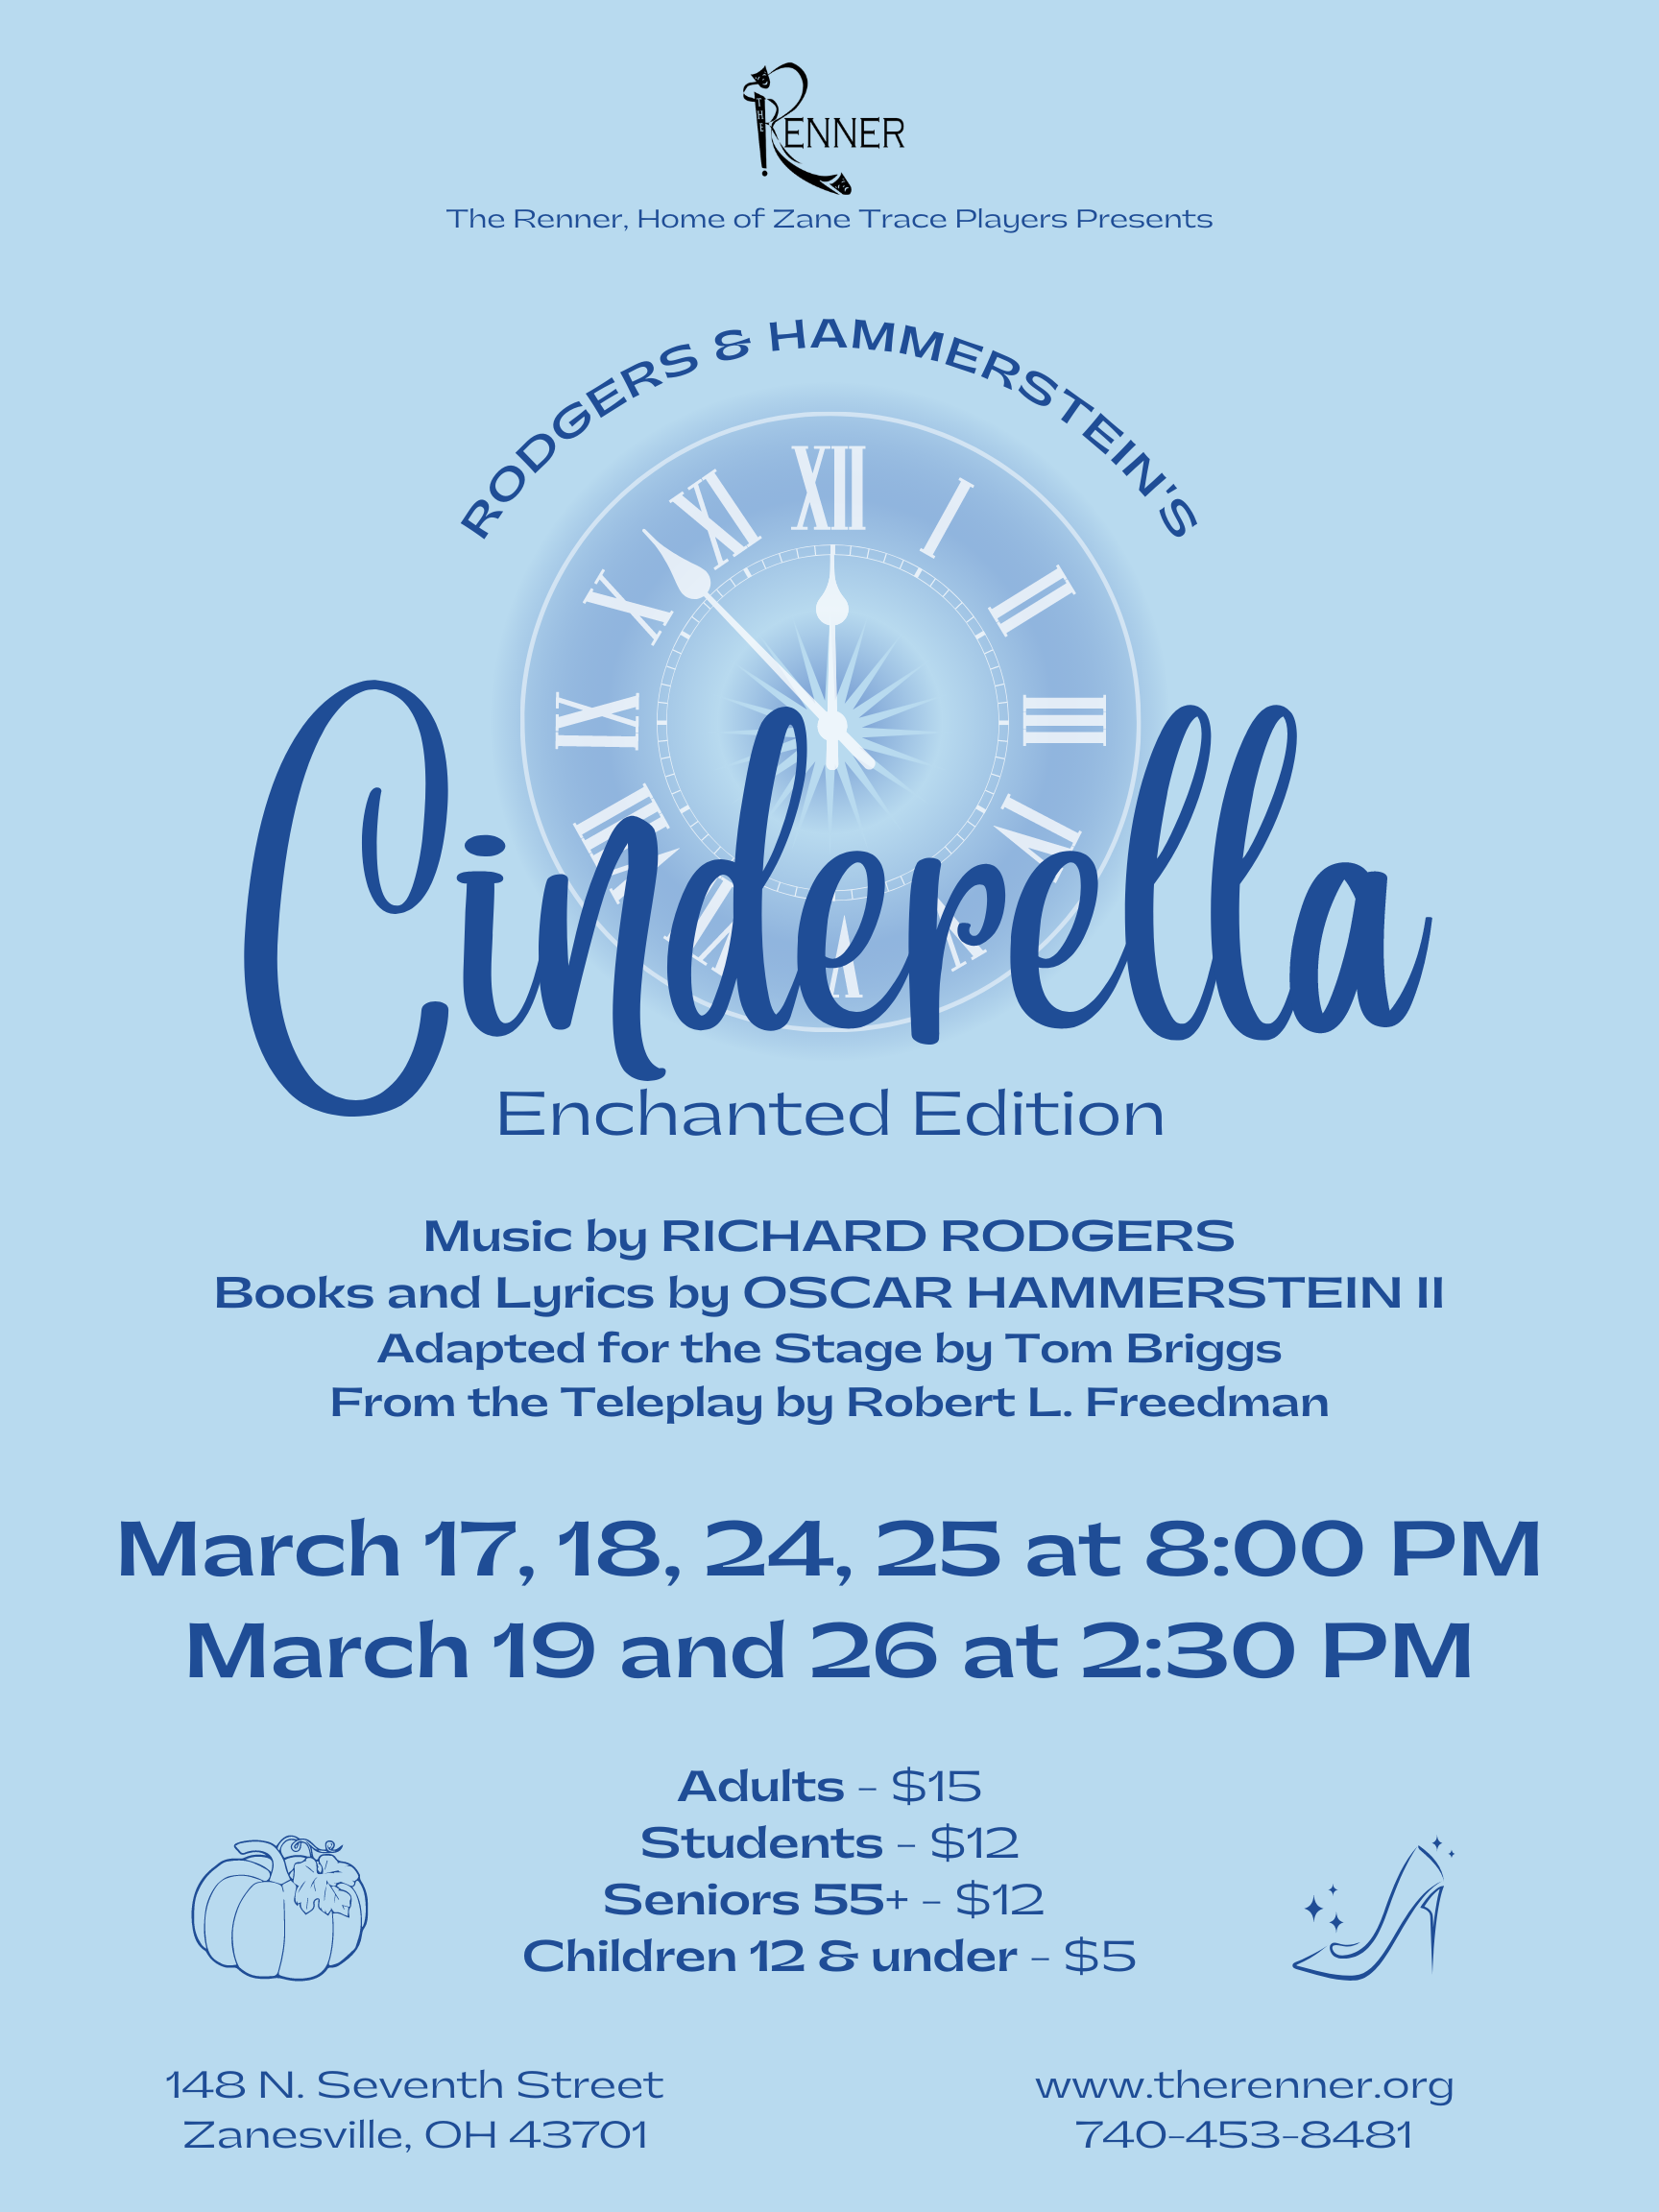 An image promoting an upcoming production of "Cinderella."